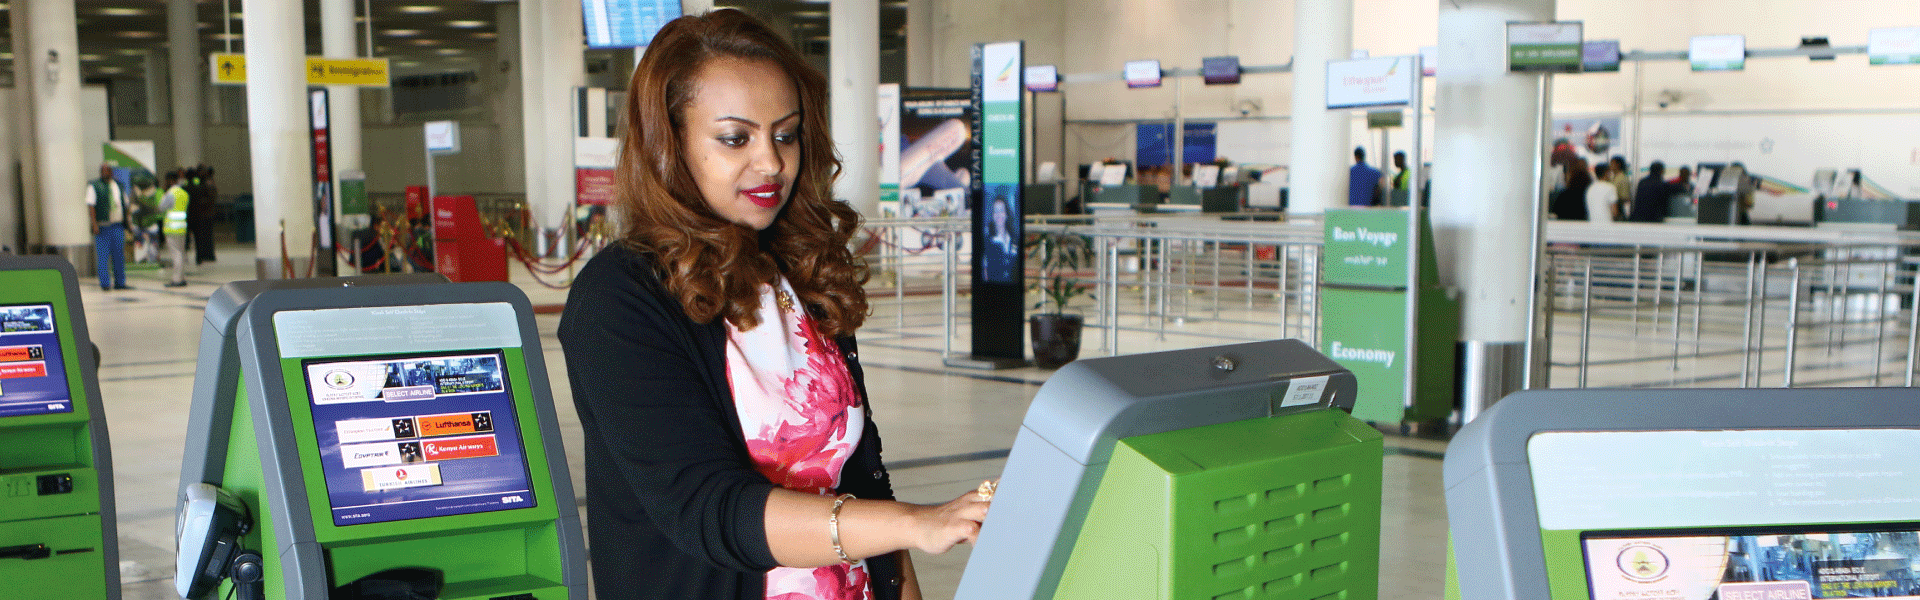 Ethiopian Airlines Ground Service Check-in kiosk